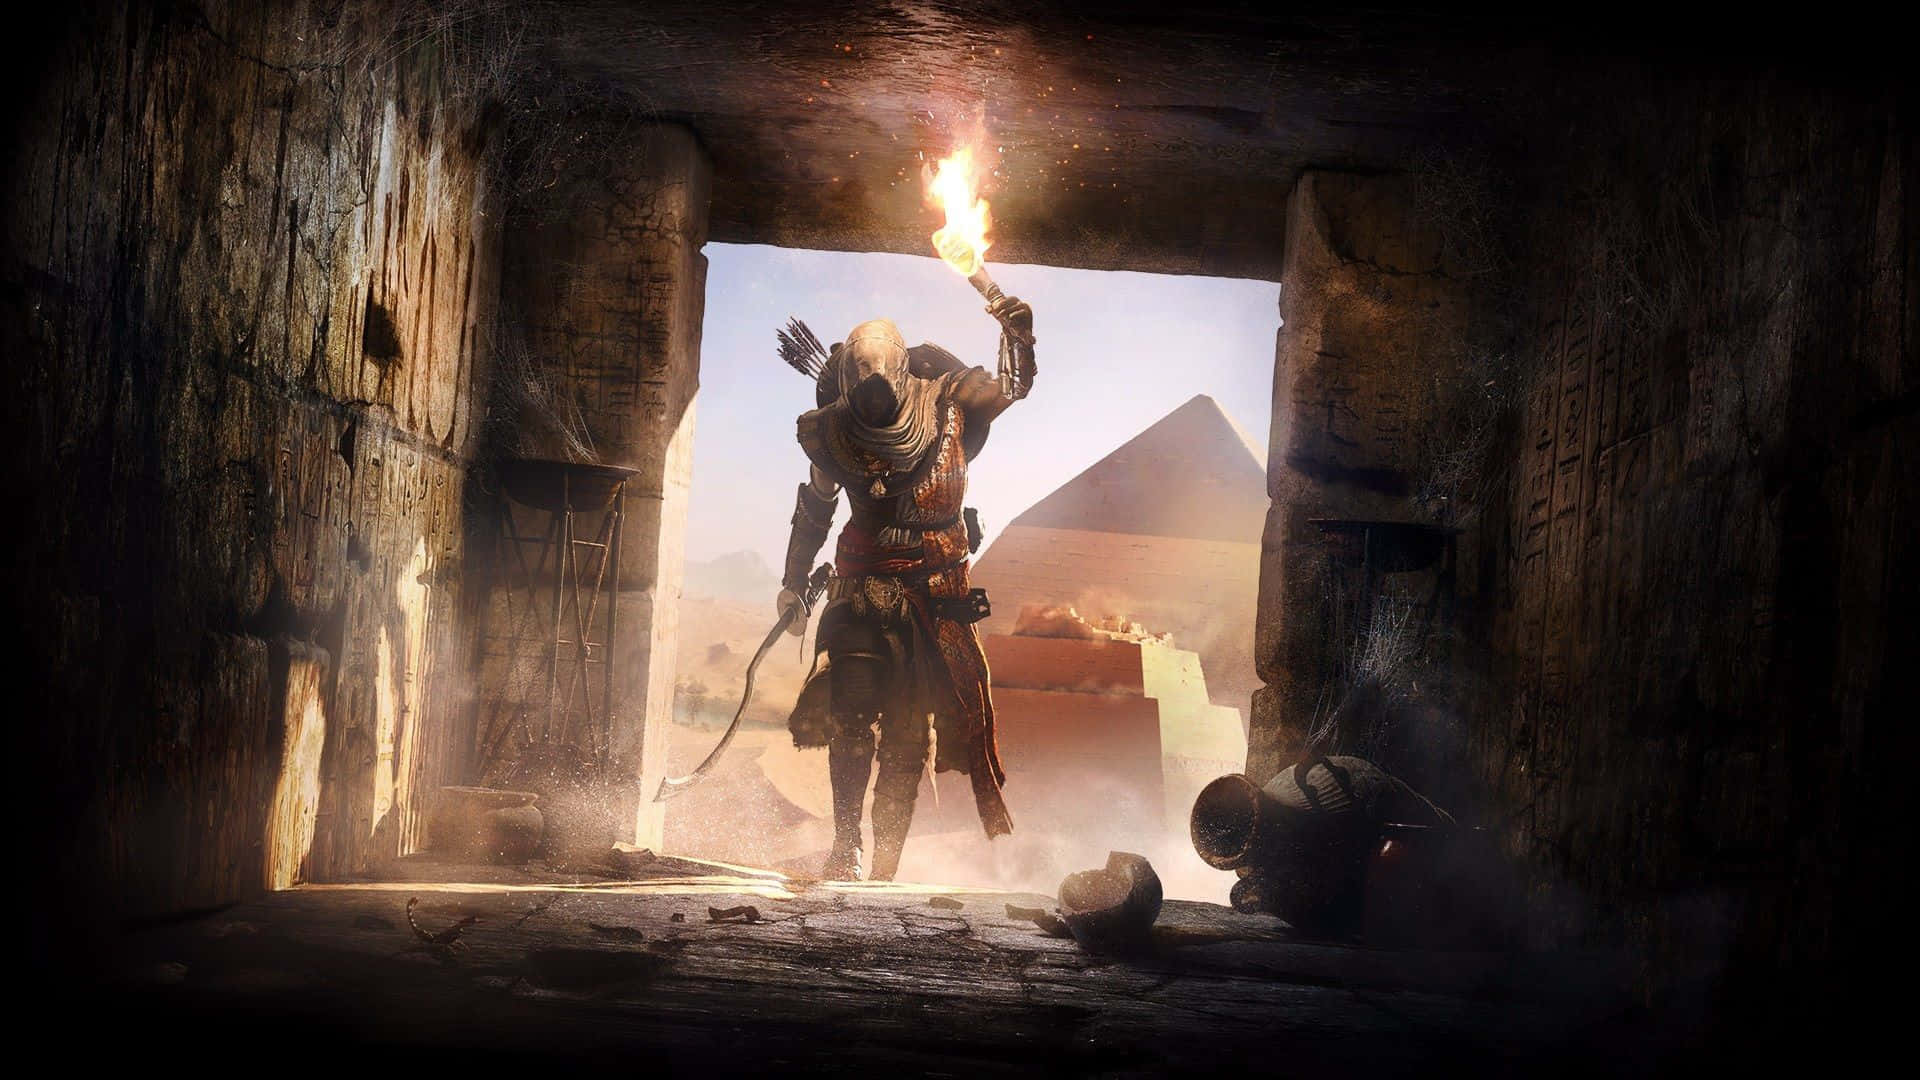 Download 1920x1080 Assassin's Creed Origins Background 